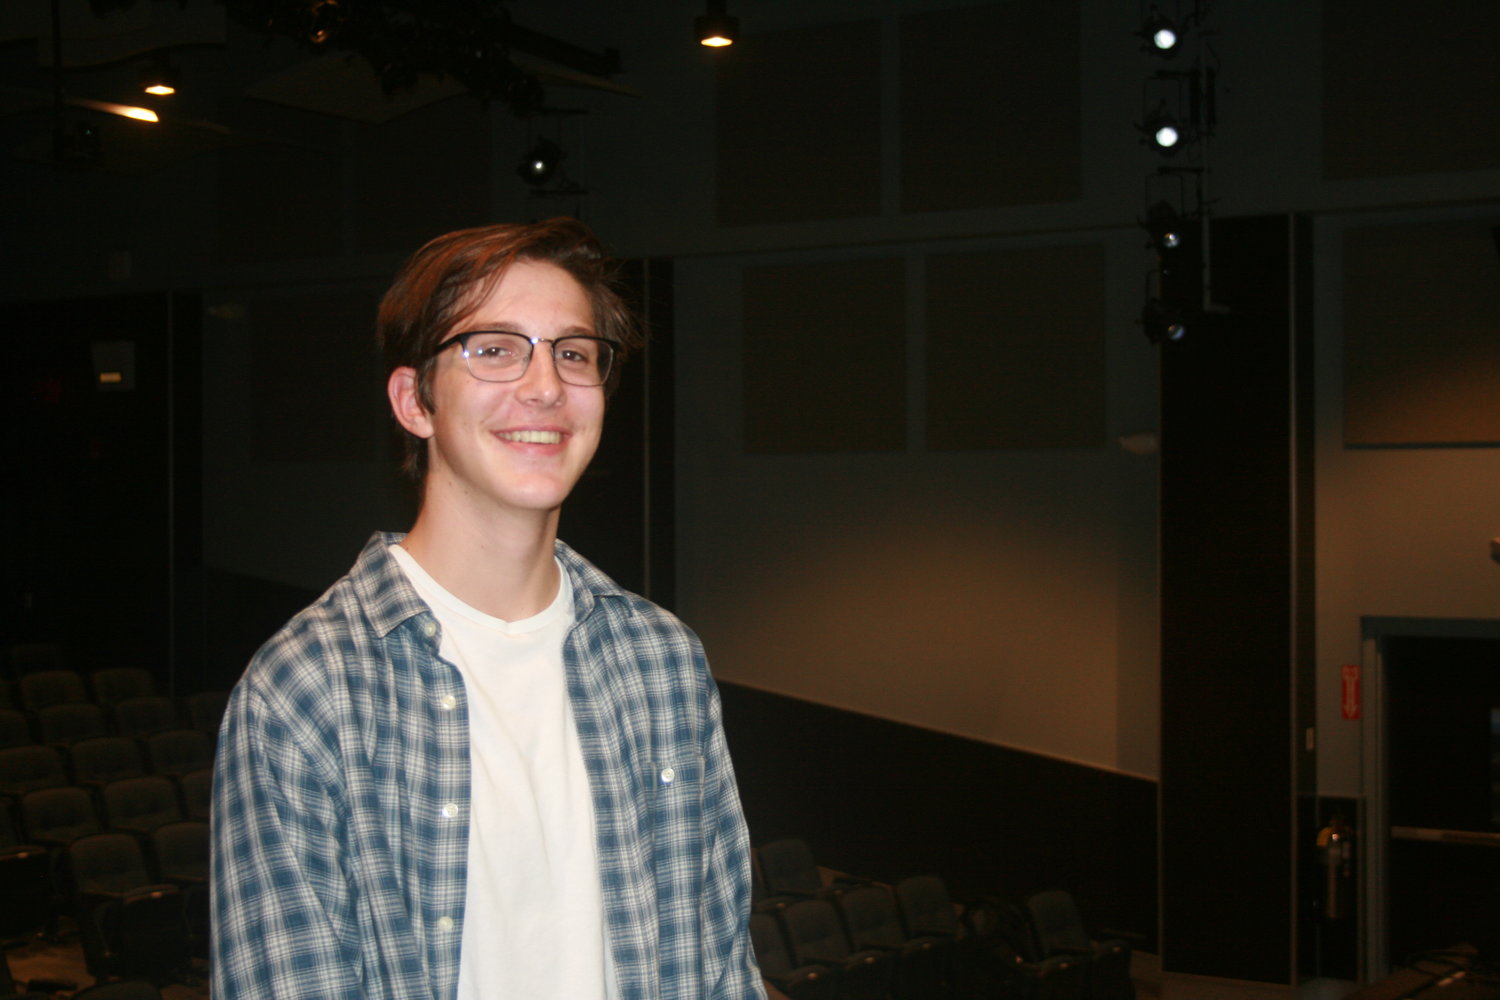 Malverne High School sophomore Michael Lawless will represent the school district at the National Honor Choir Conference in February. He is just the second Malverne student ever selected to participate in the conference.